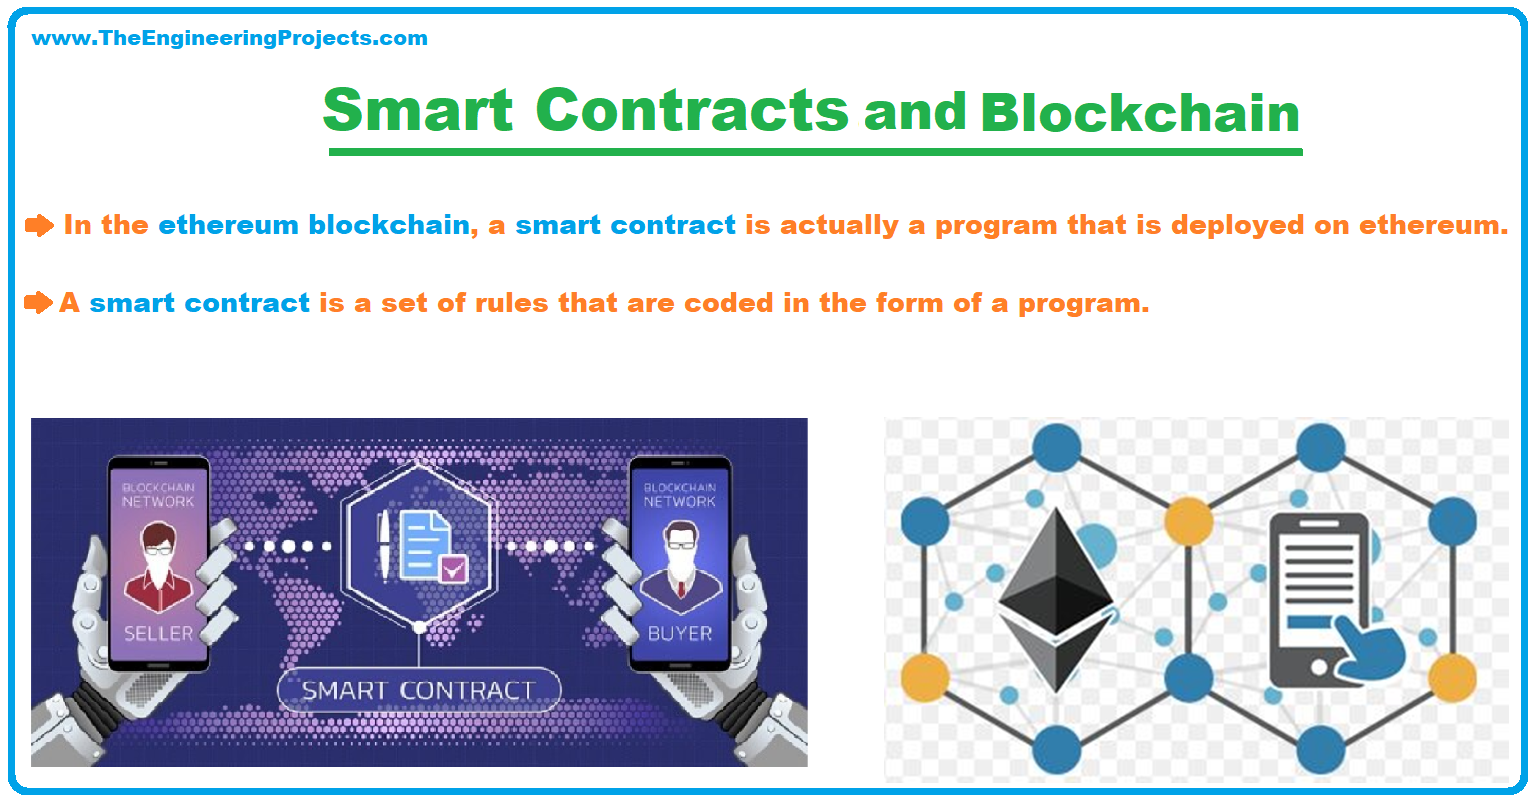 what is Smart Contracts, blockchain smart contract, Introduction to smart contracts, Writing Smart Contracts, Smart contracts tools, Deploying Smart Contracts